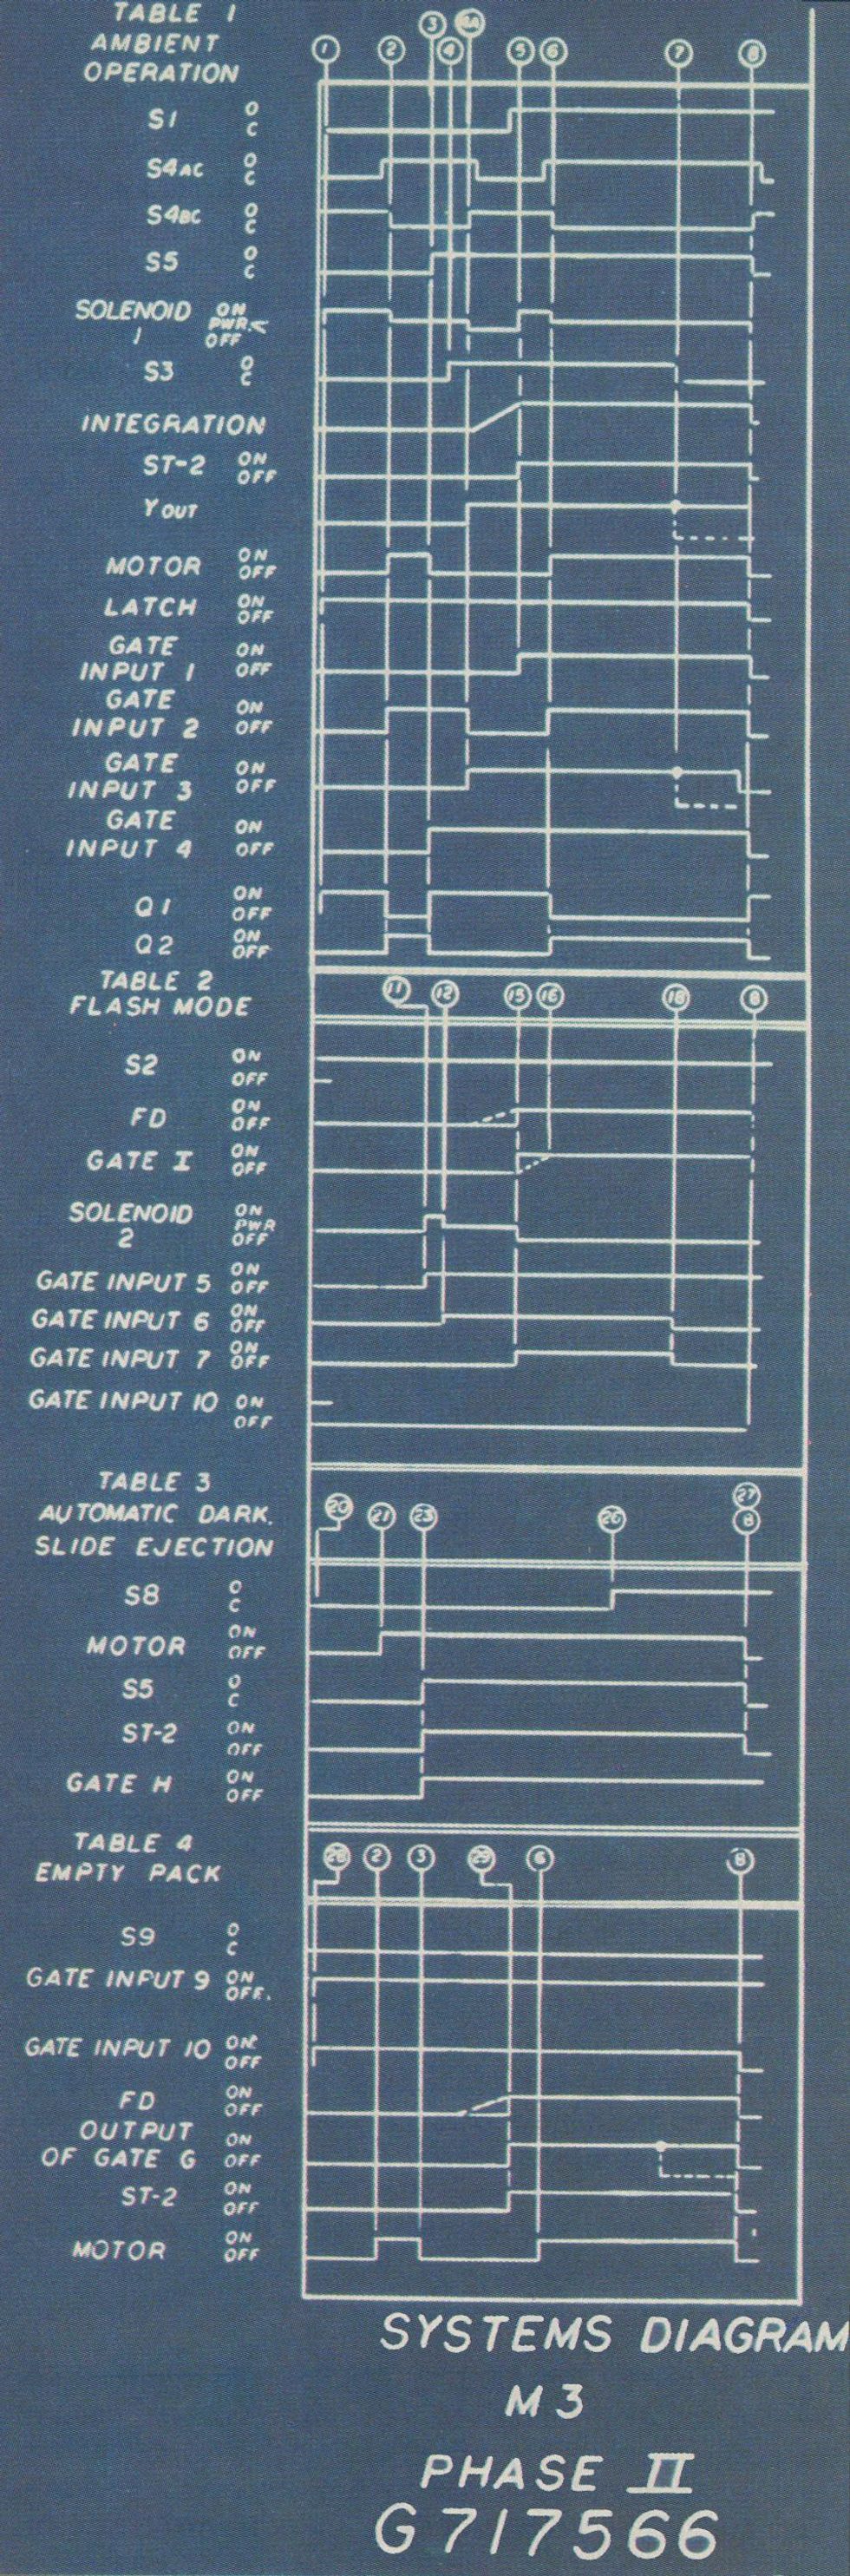 white wiring diagram on blue-grey background with gates, outputs, and other features indicated, plus words 